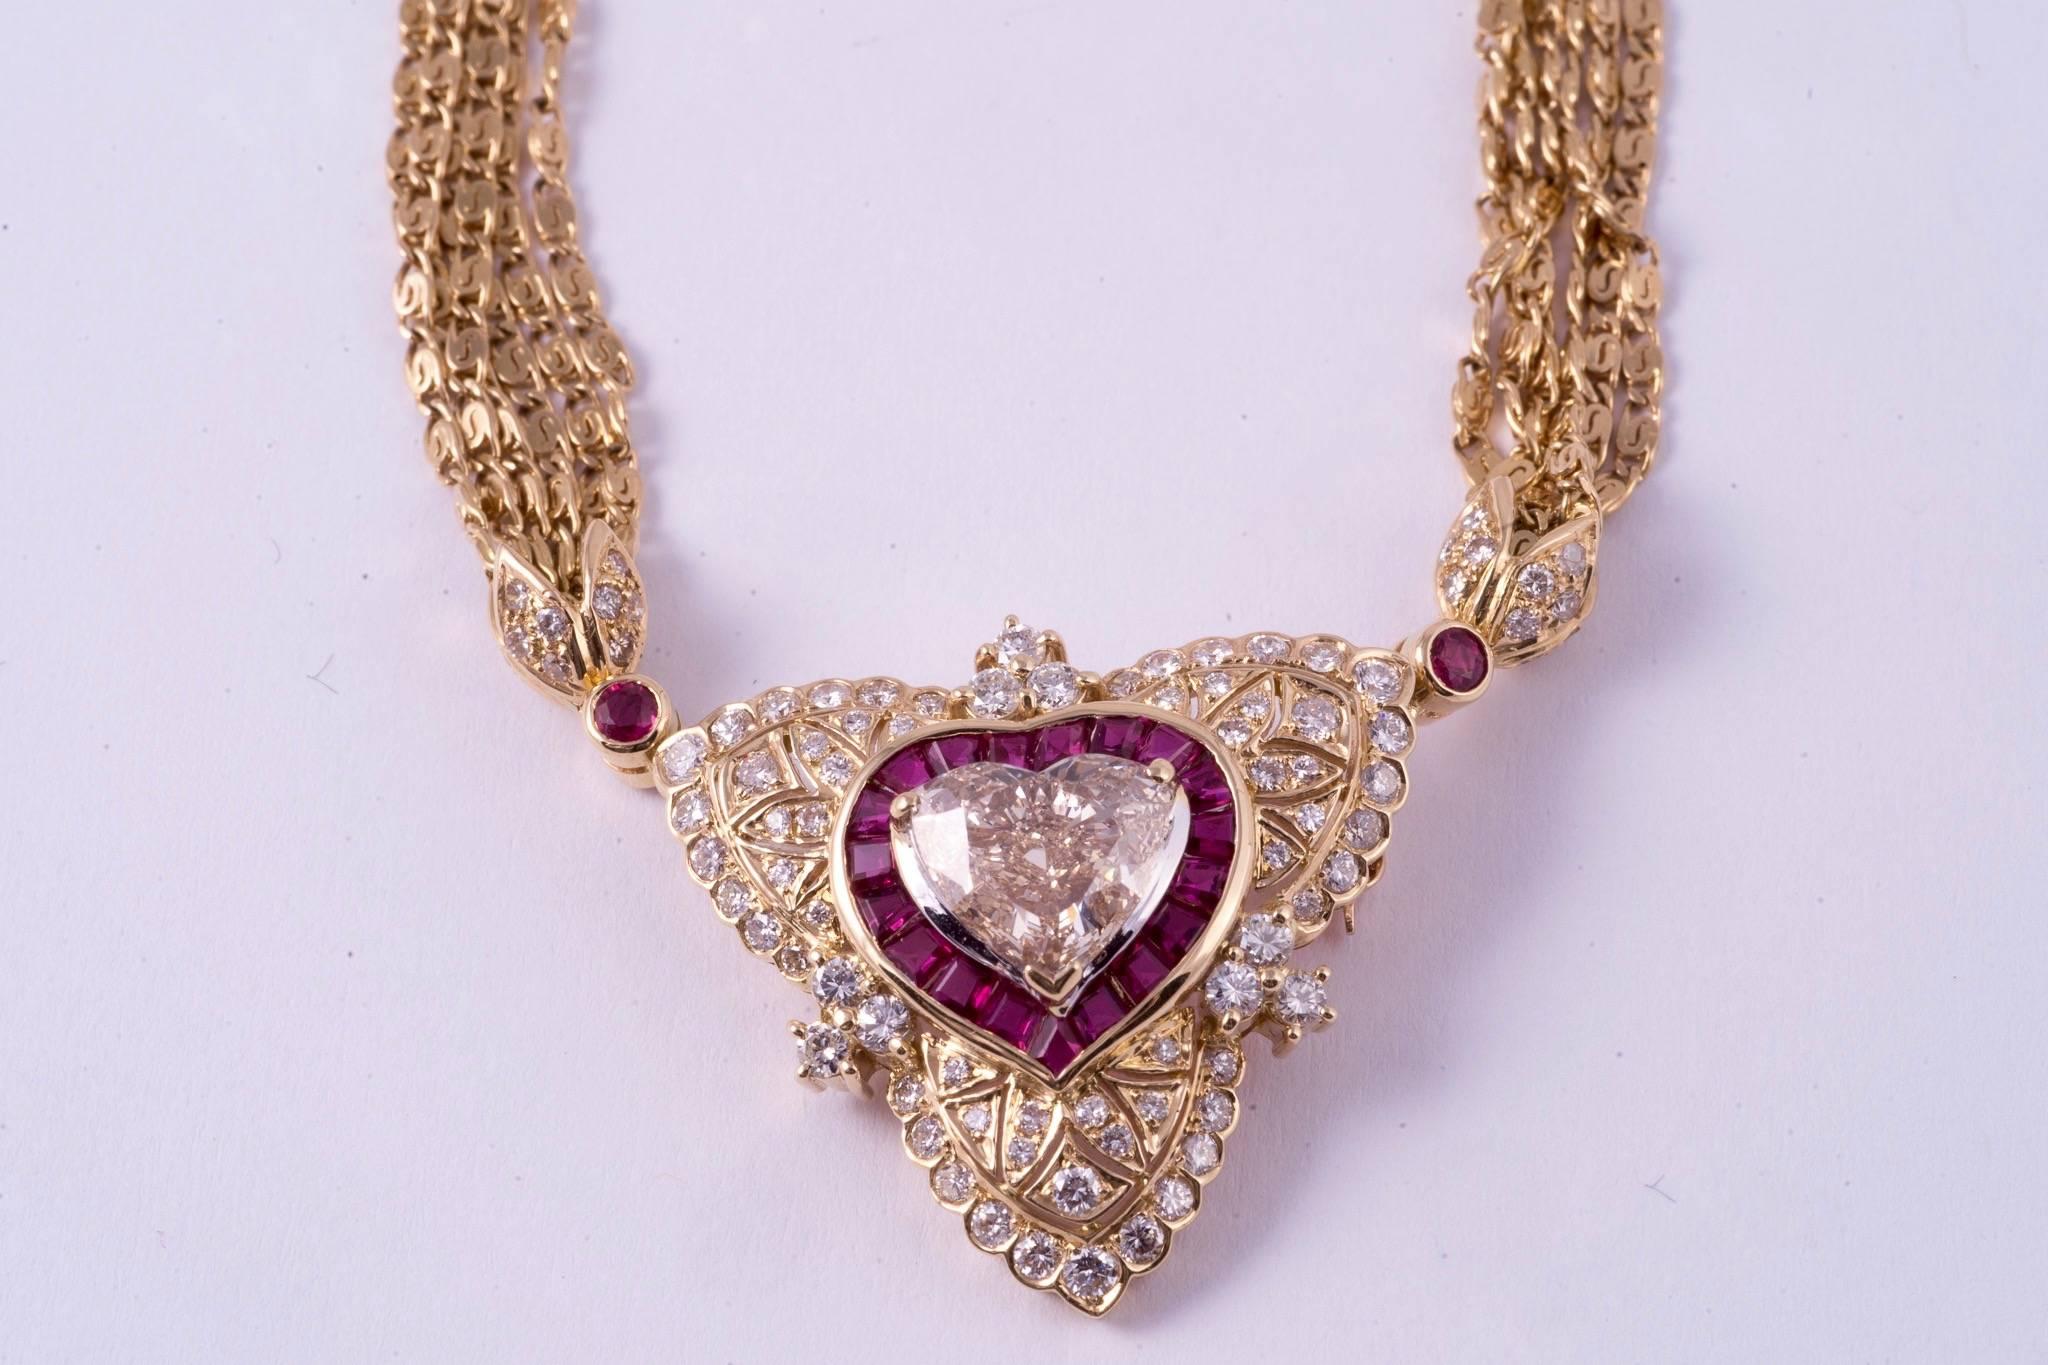 Contemporary Regal Diamond Heart Necklace with Ruby and Diamonds in 18 Karat Gold